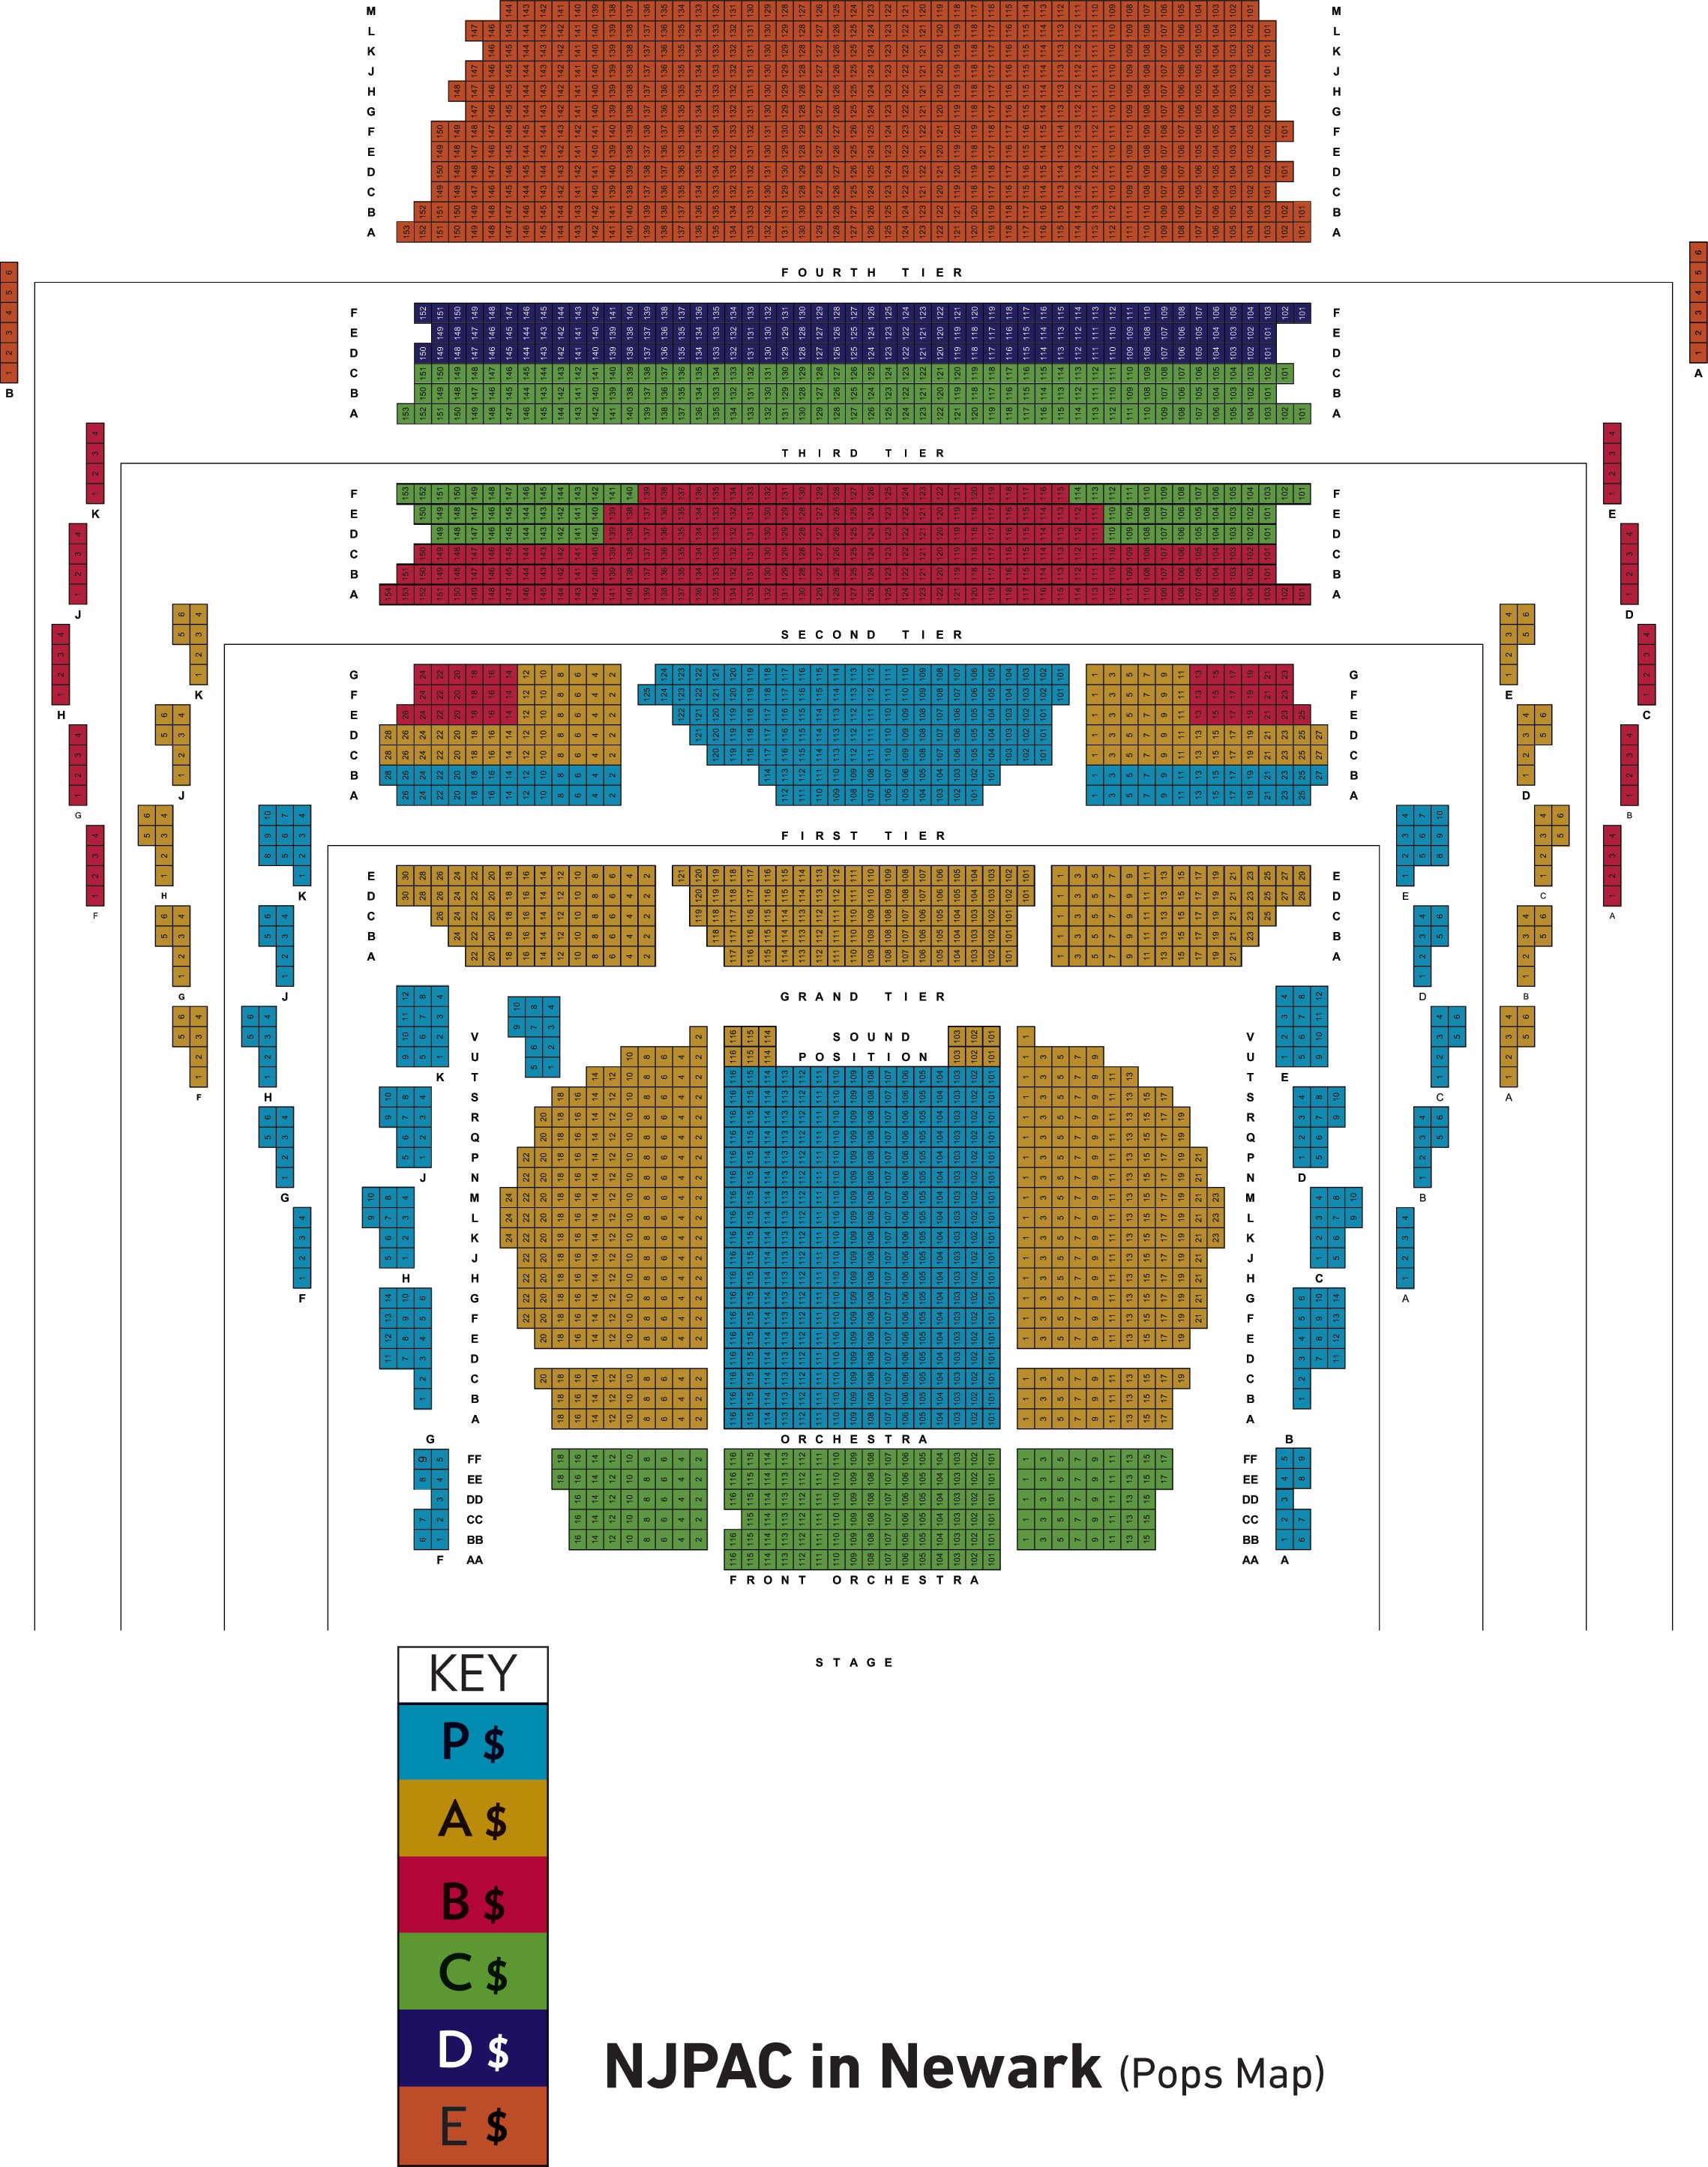 Prudential Hall Seating Chart